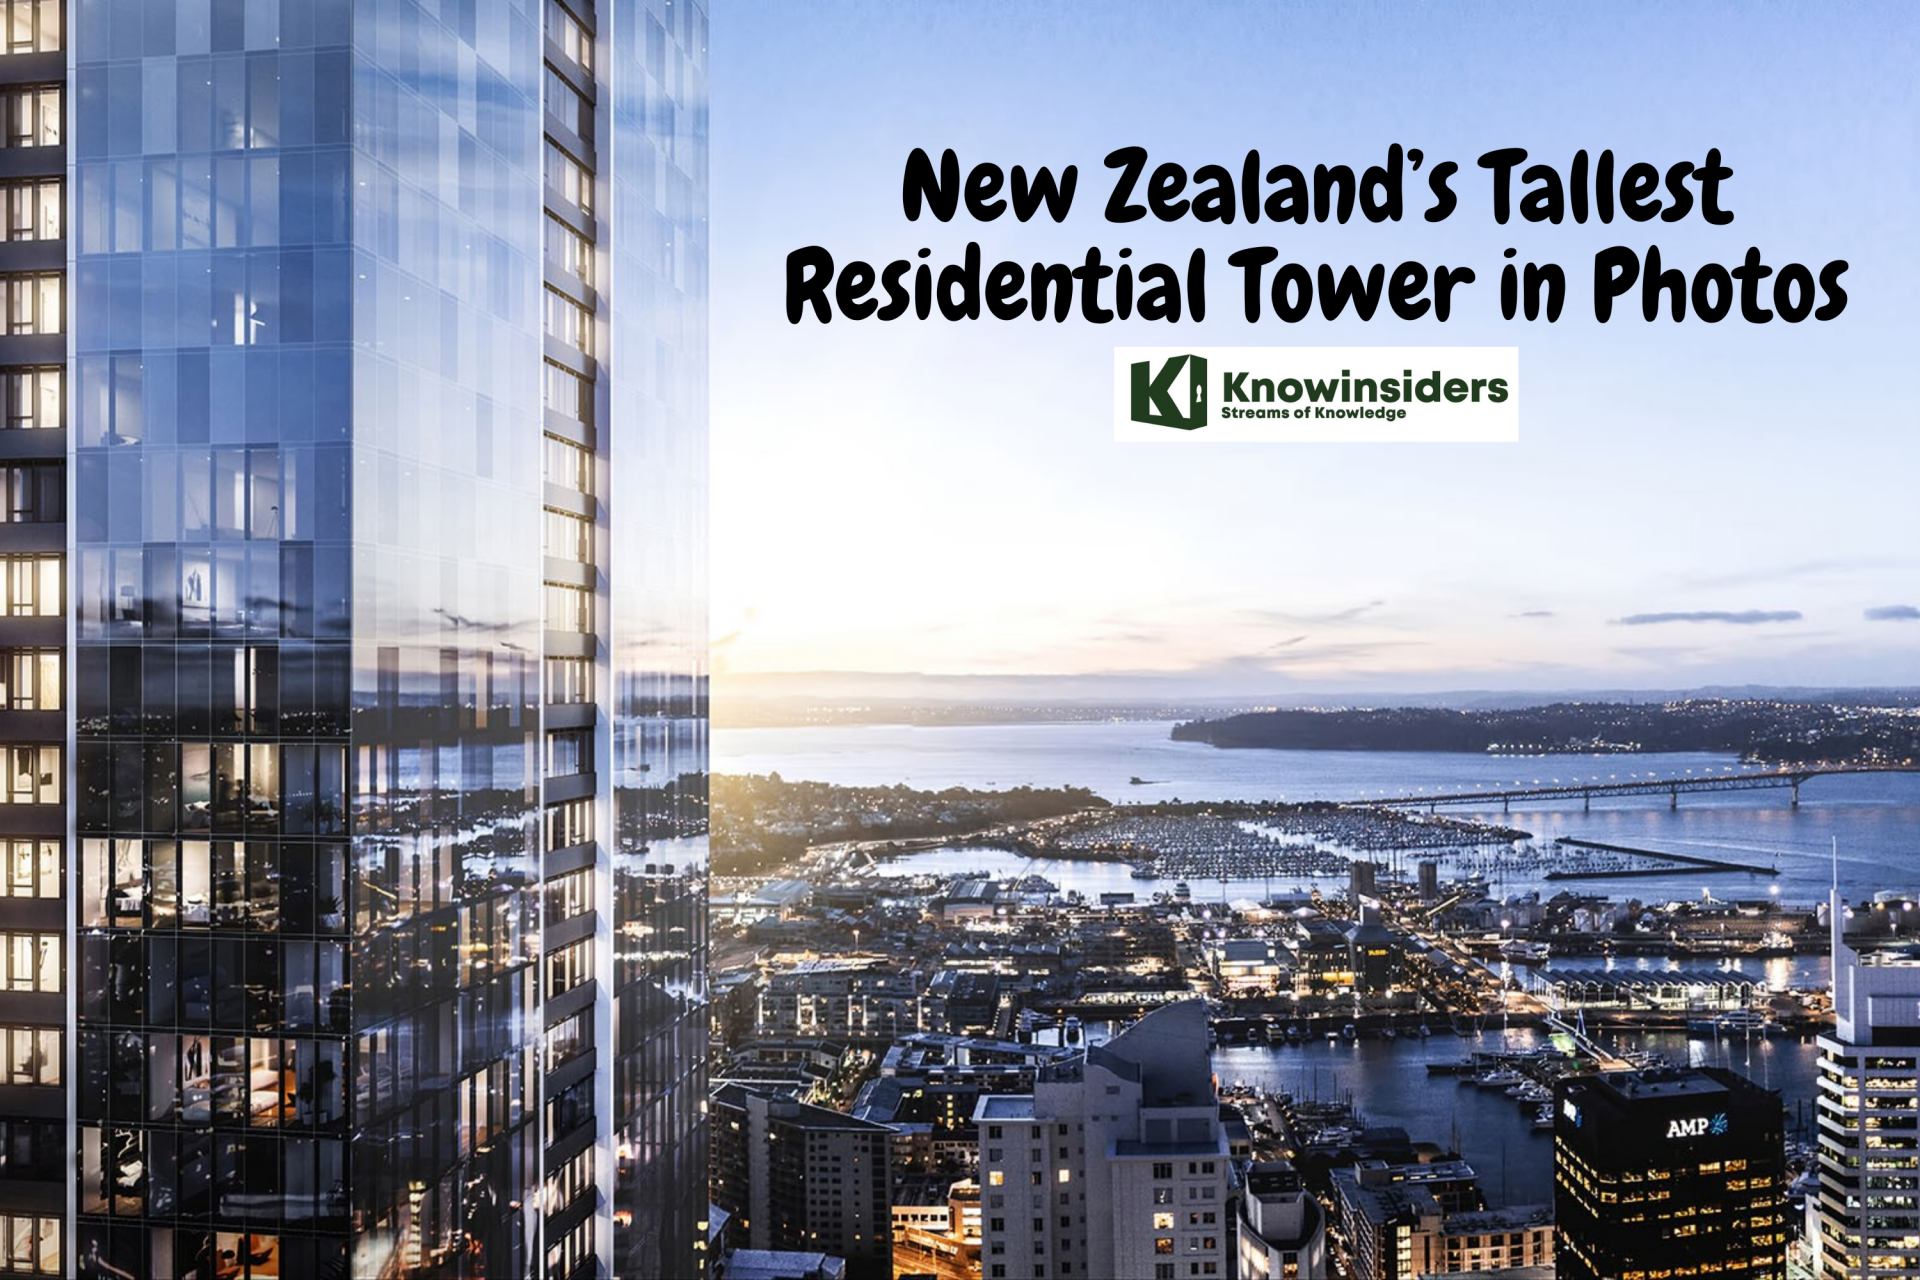 New Zealand’s Tallest Residential Tower in Photos